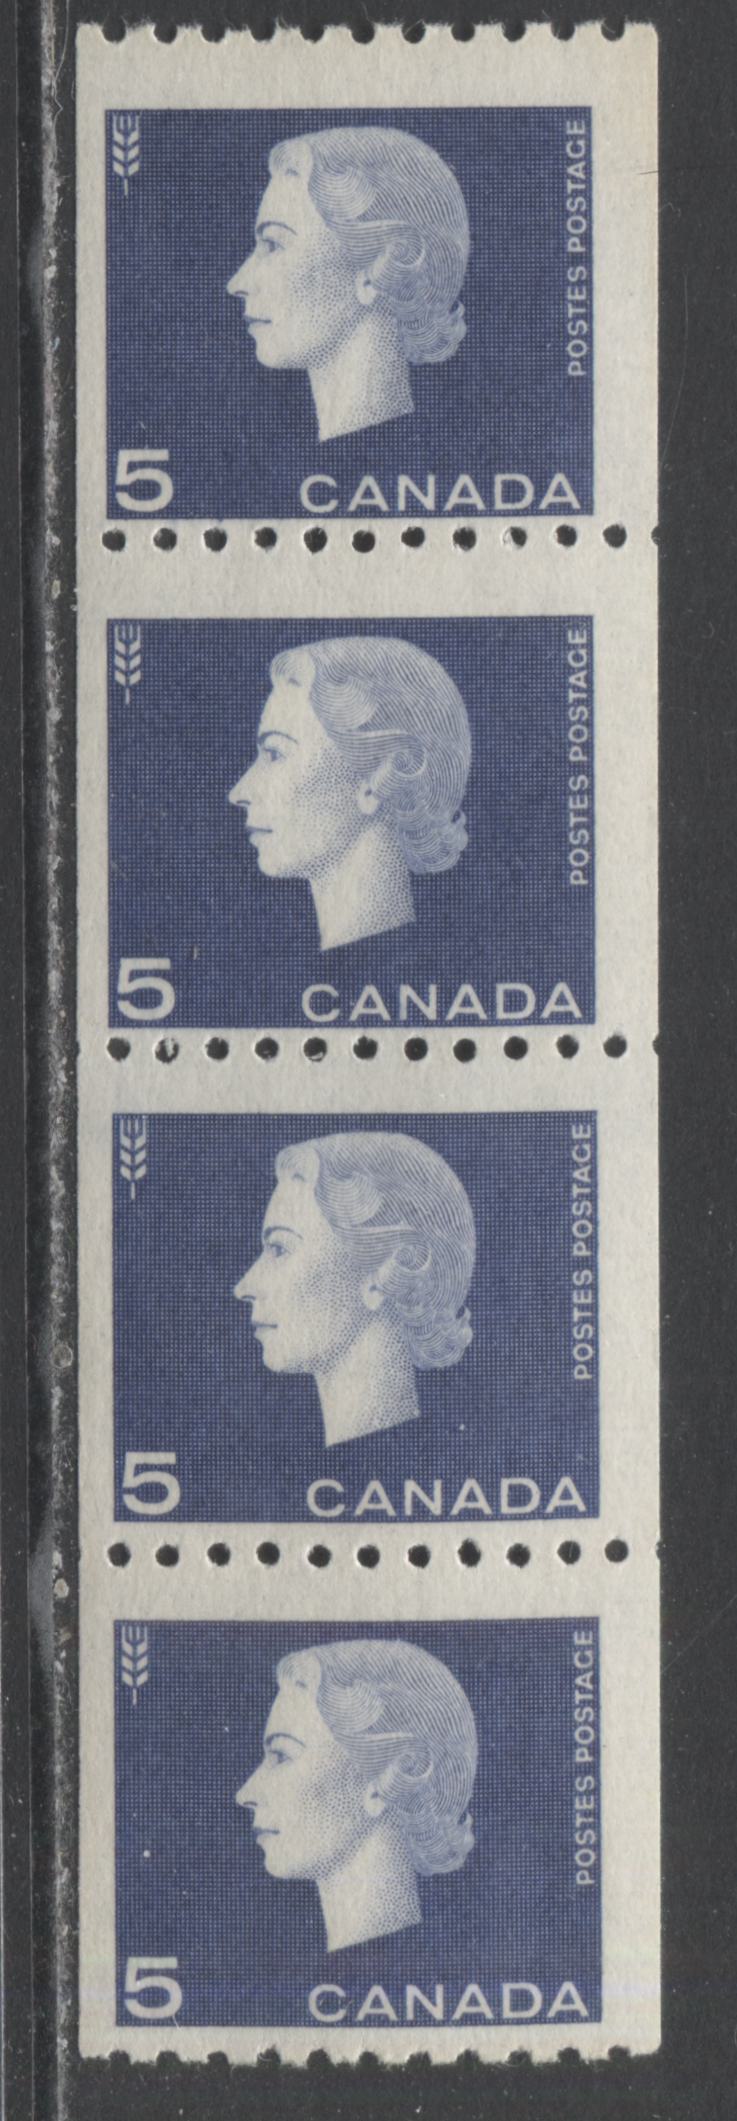 Lot 178 Canada #409 5c Violet Blue Agriculture, 1962-1963 Cameo Coil Issue, A FNH Coil Strip Of 4 With 3.5mm Narrow Spacing Between Center Stamps